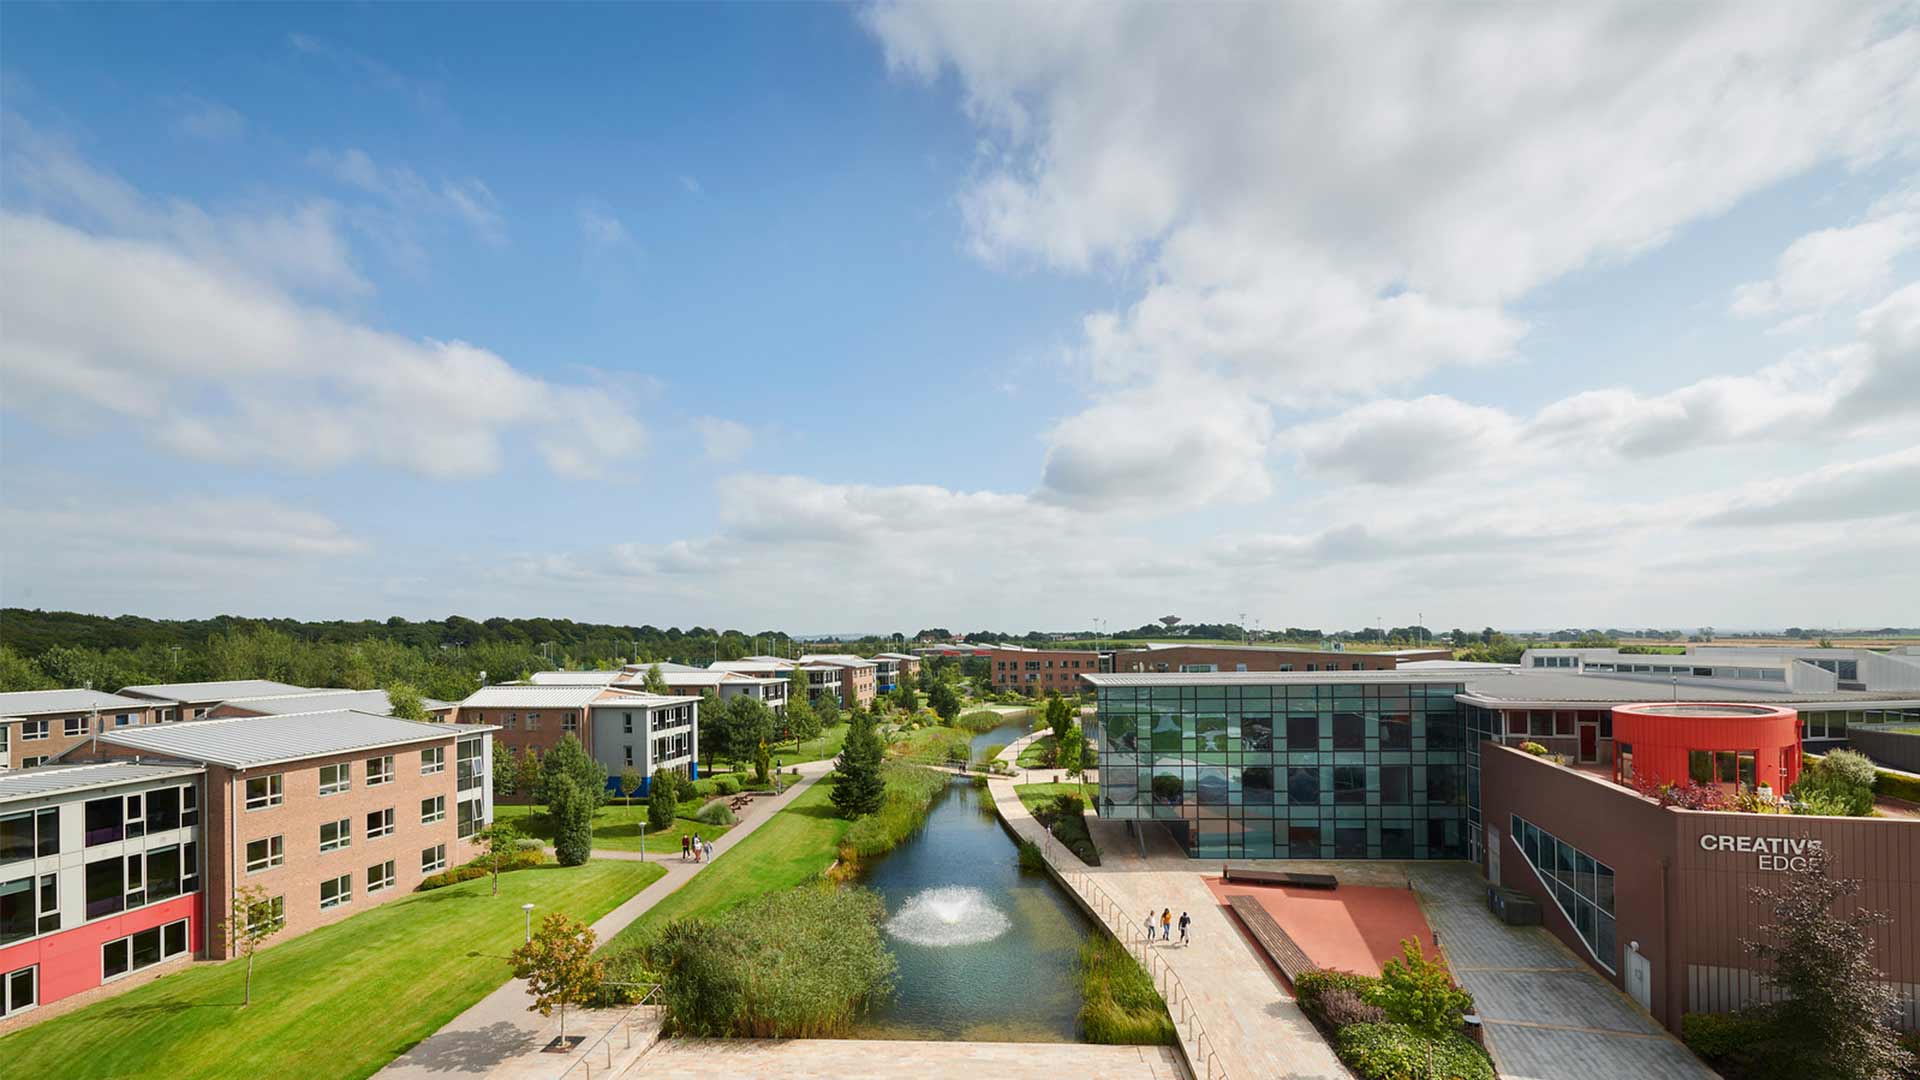 Arial view of Ormskirk campus